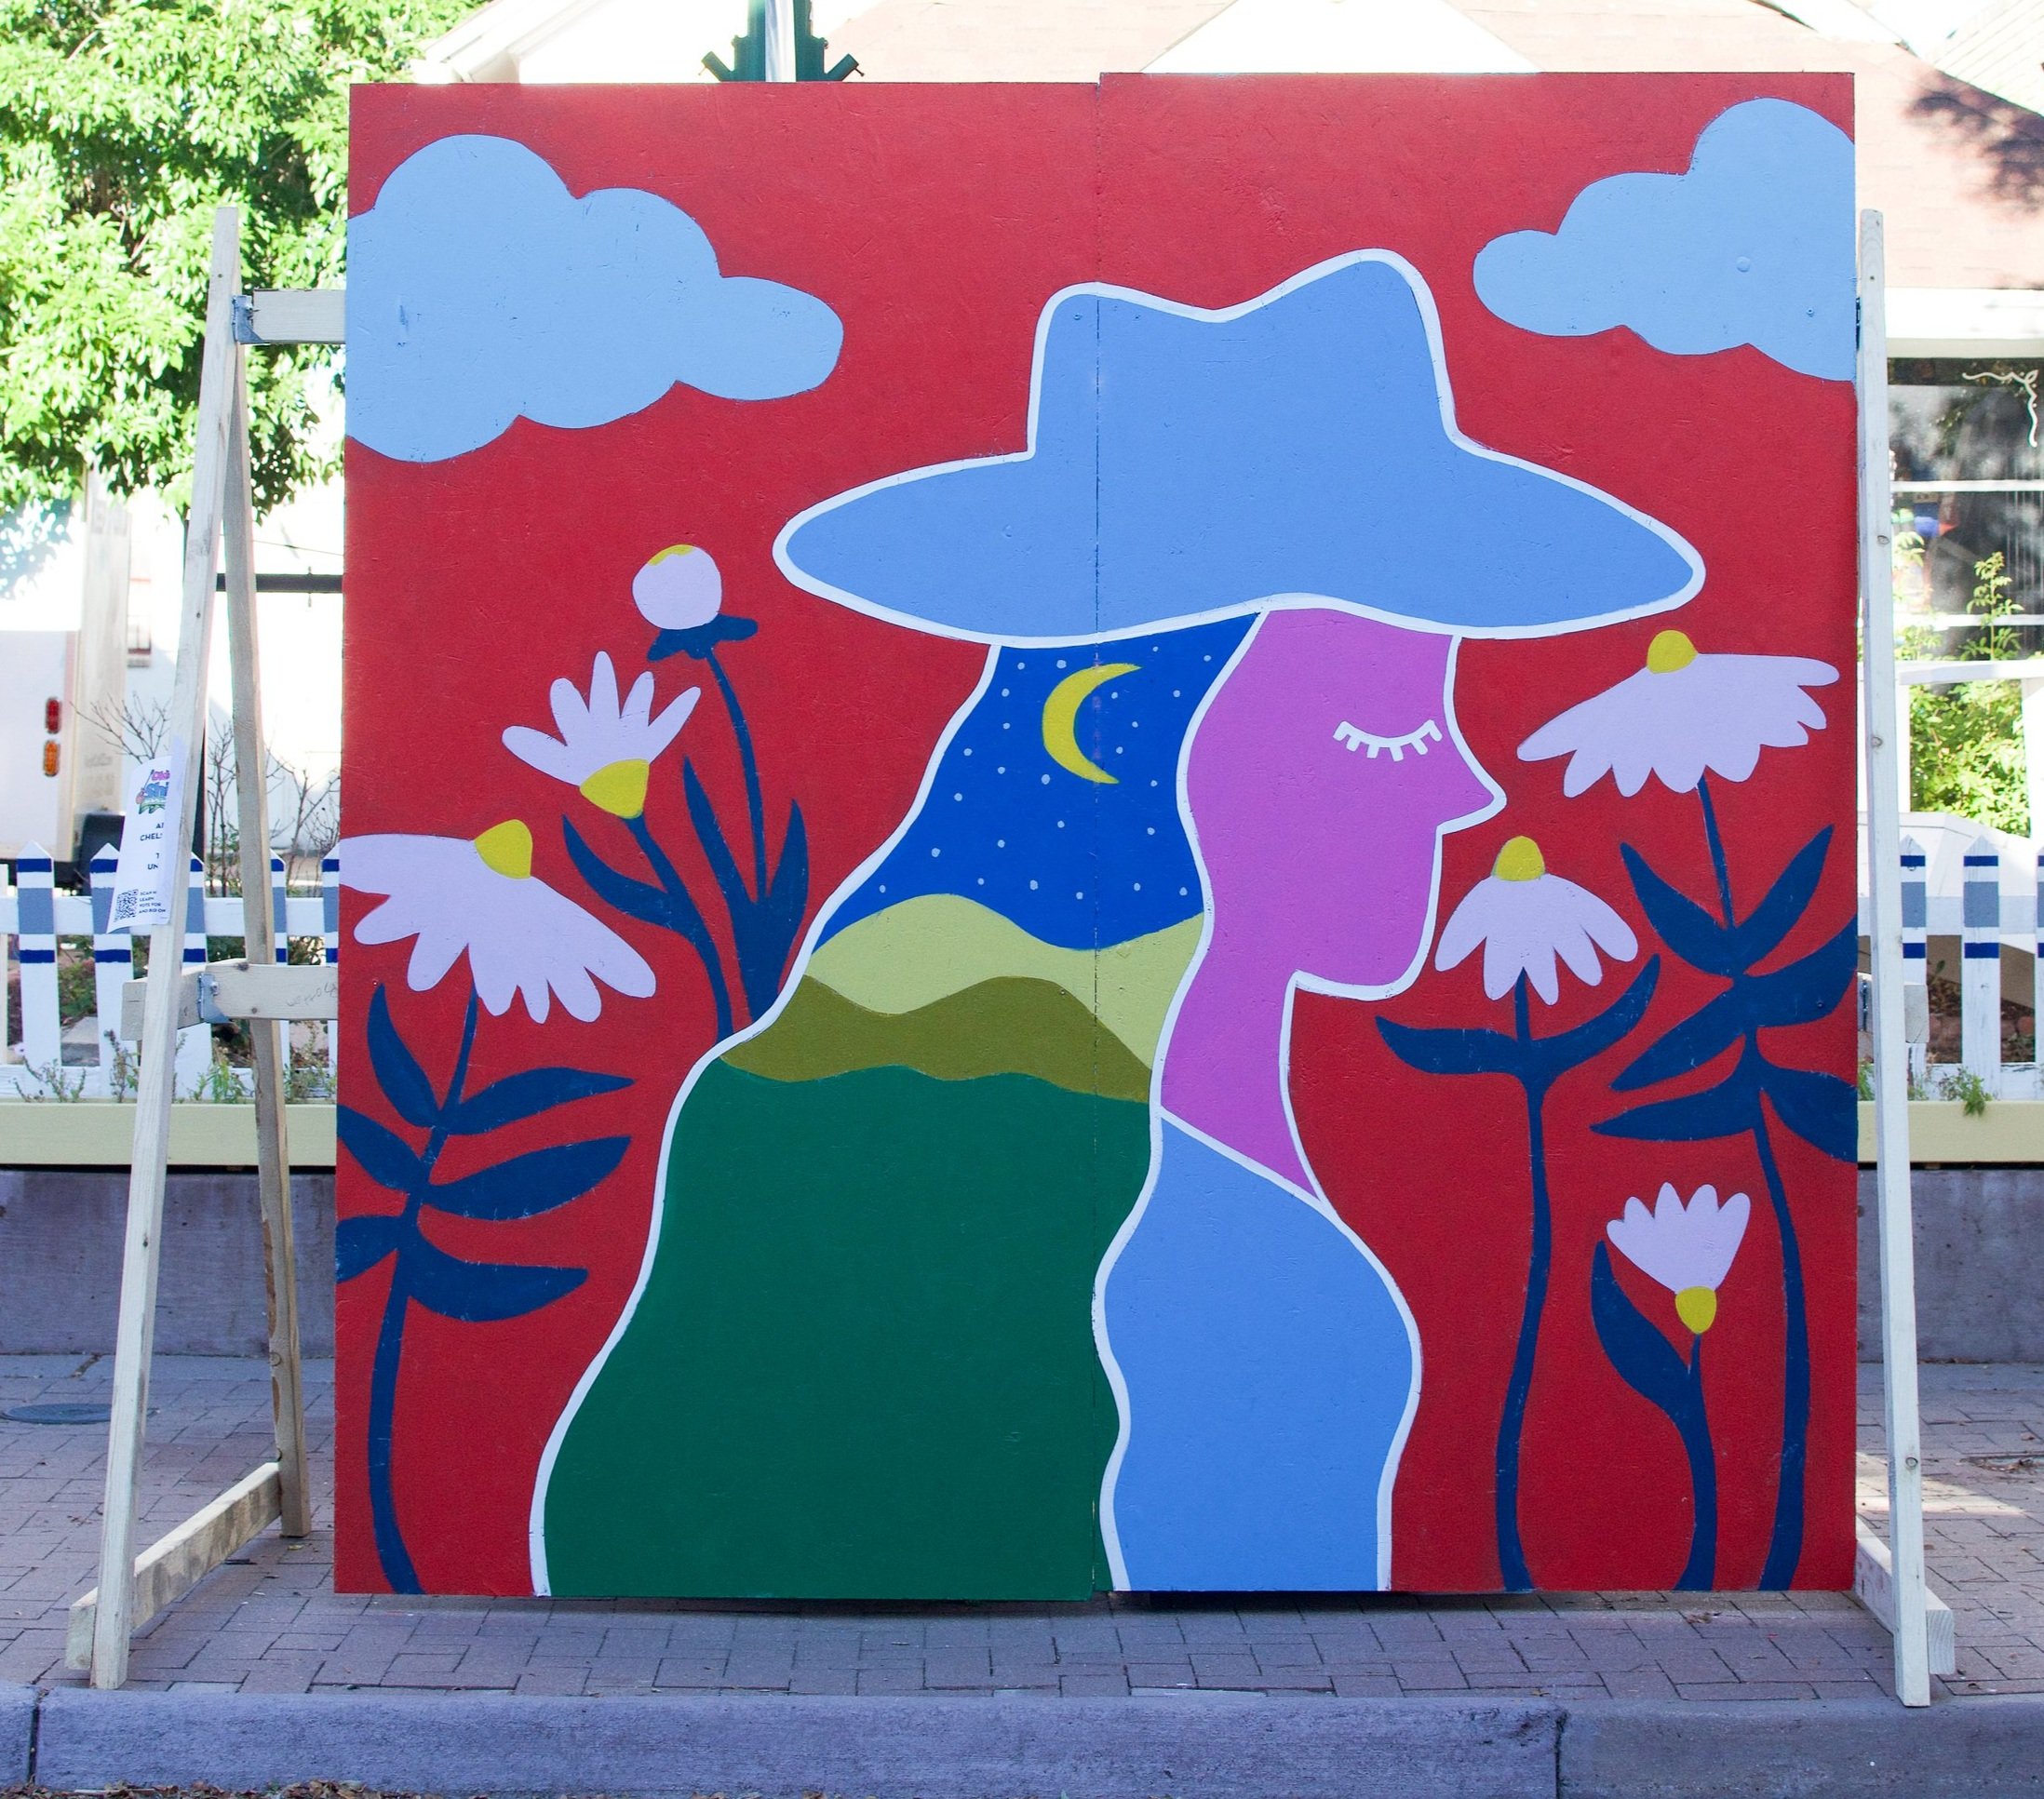 Nighttime Cowgirl, 8 ft x 8 ft, Olde Town Arvada, CO